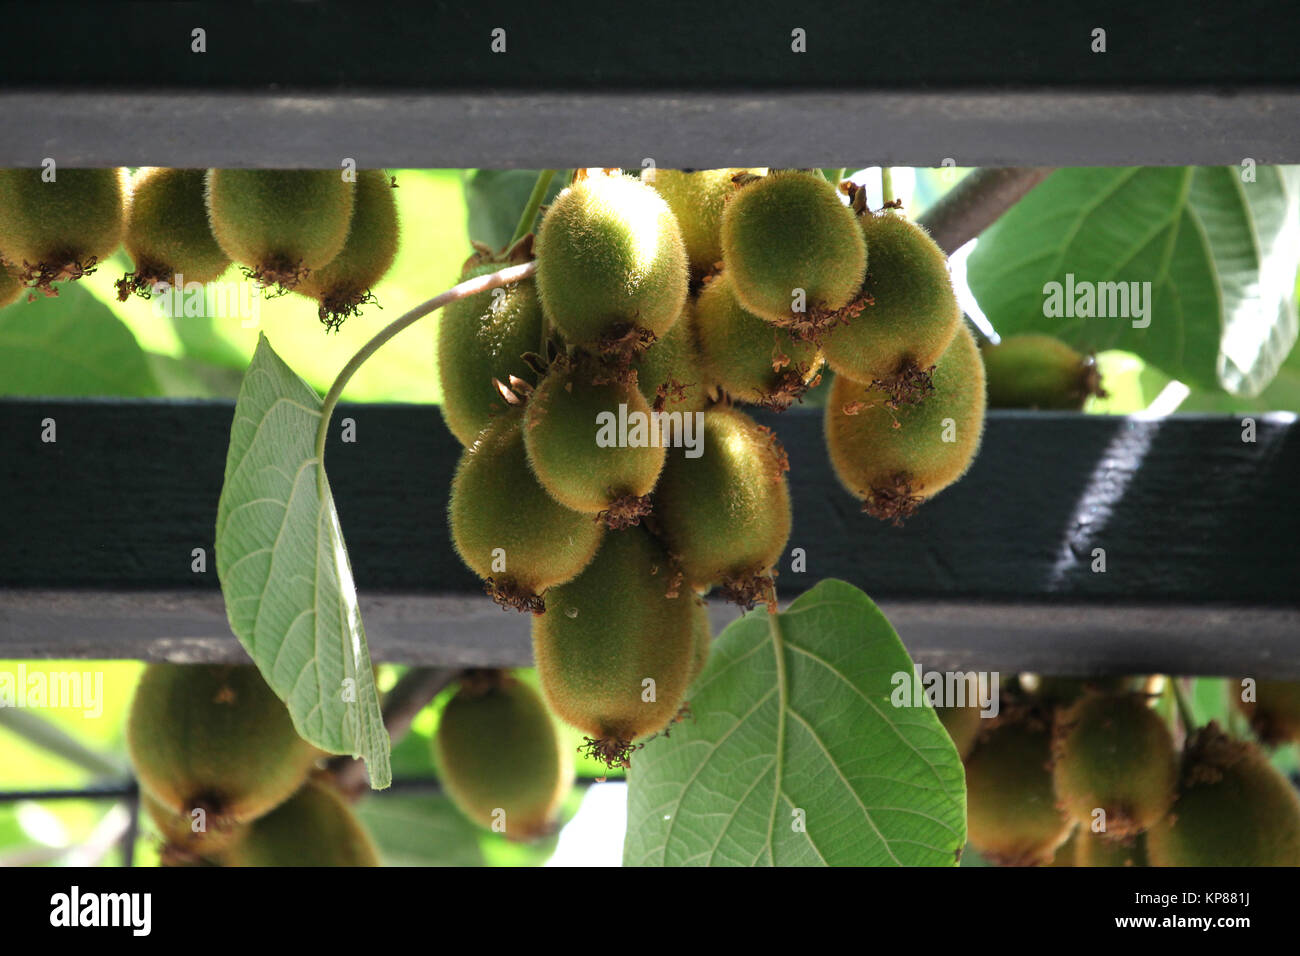 immature Kiwis growing through a sliver in a park Stock Photo